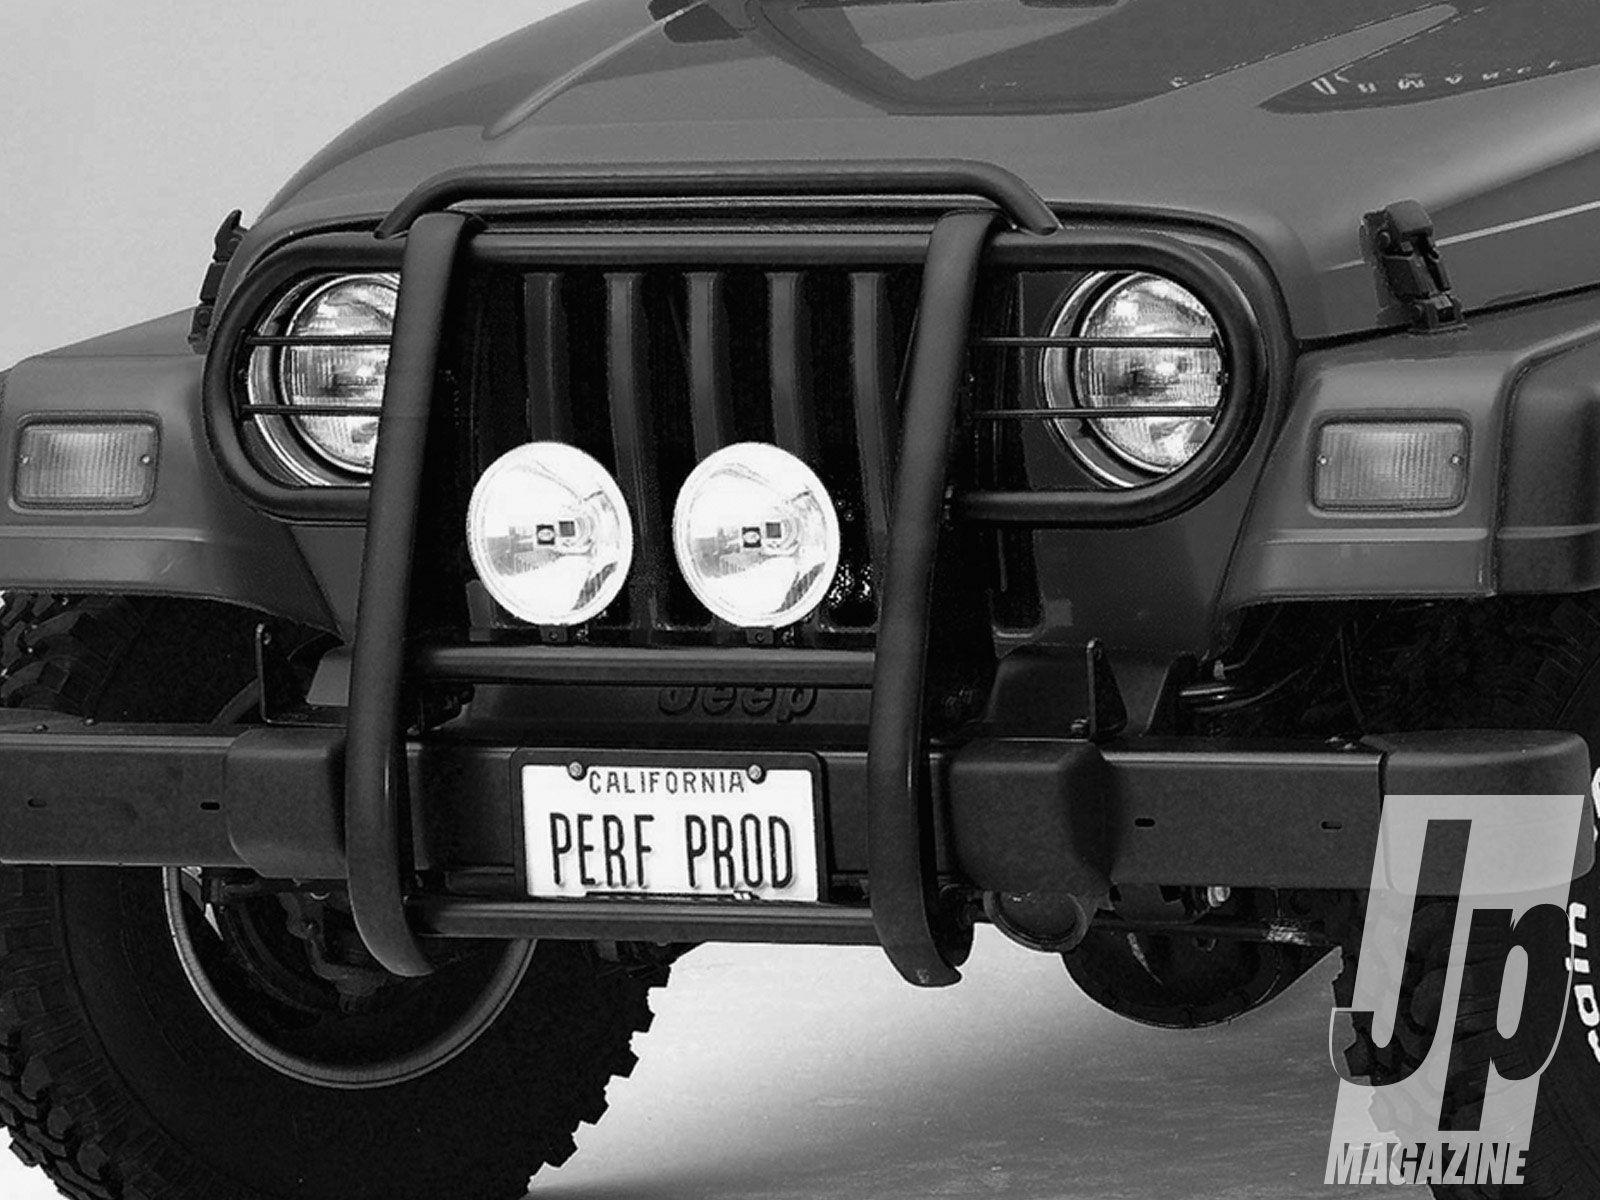 Jeep TJ Grill Logo - WRG-3497] Jeep Wrangler Brush Guard User Manuals | 2019 Ebook Library